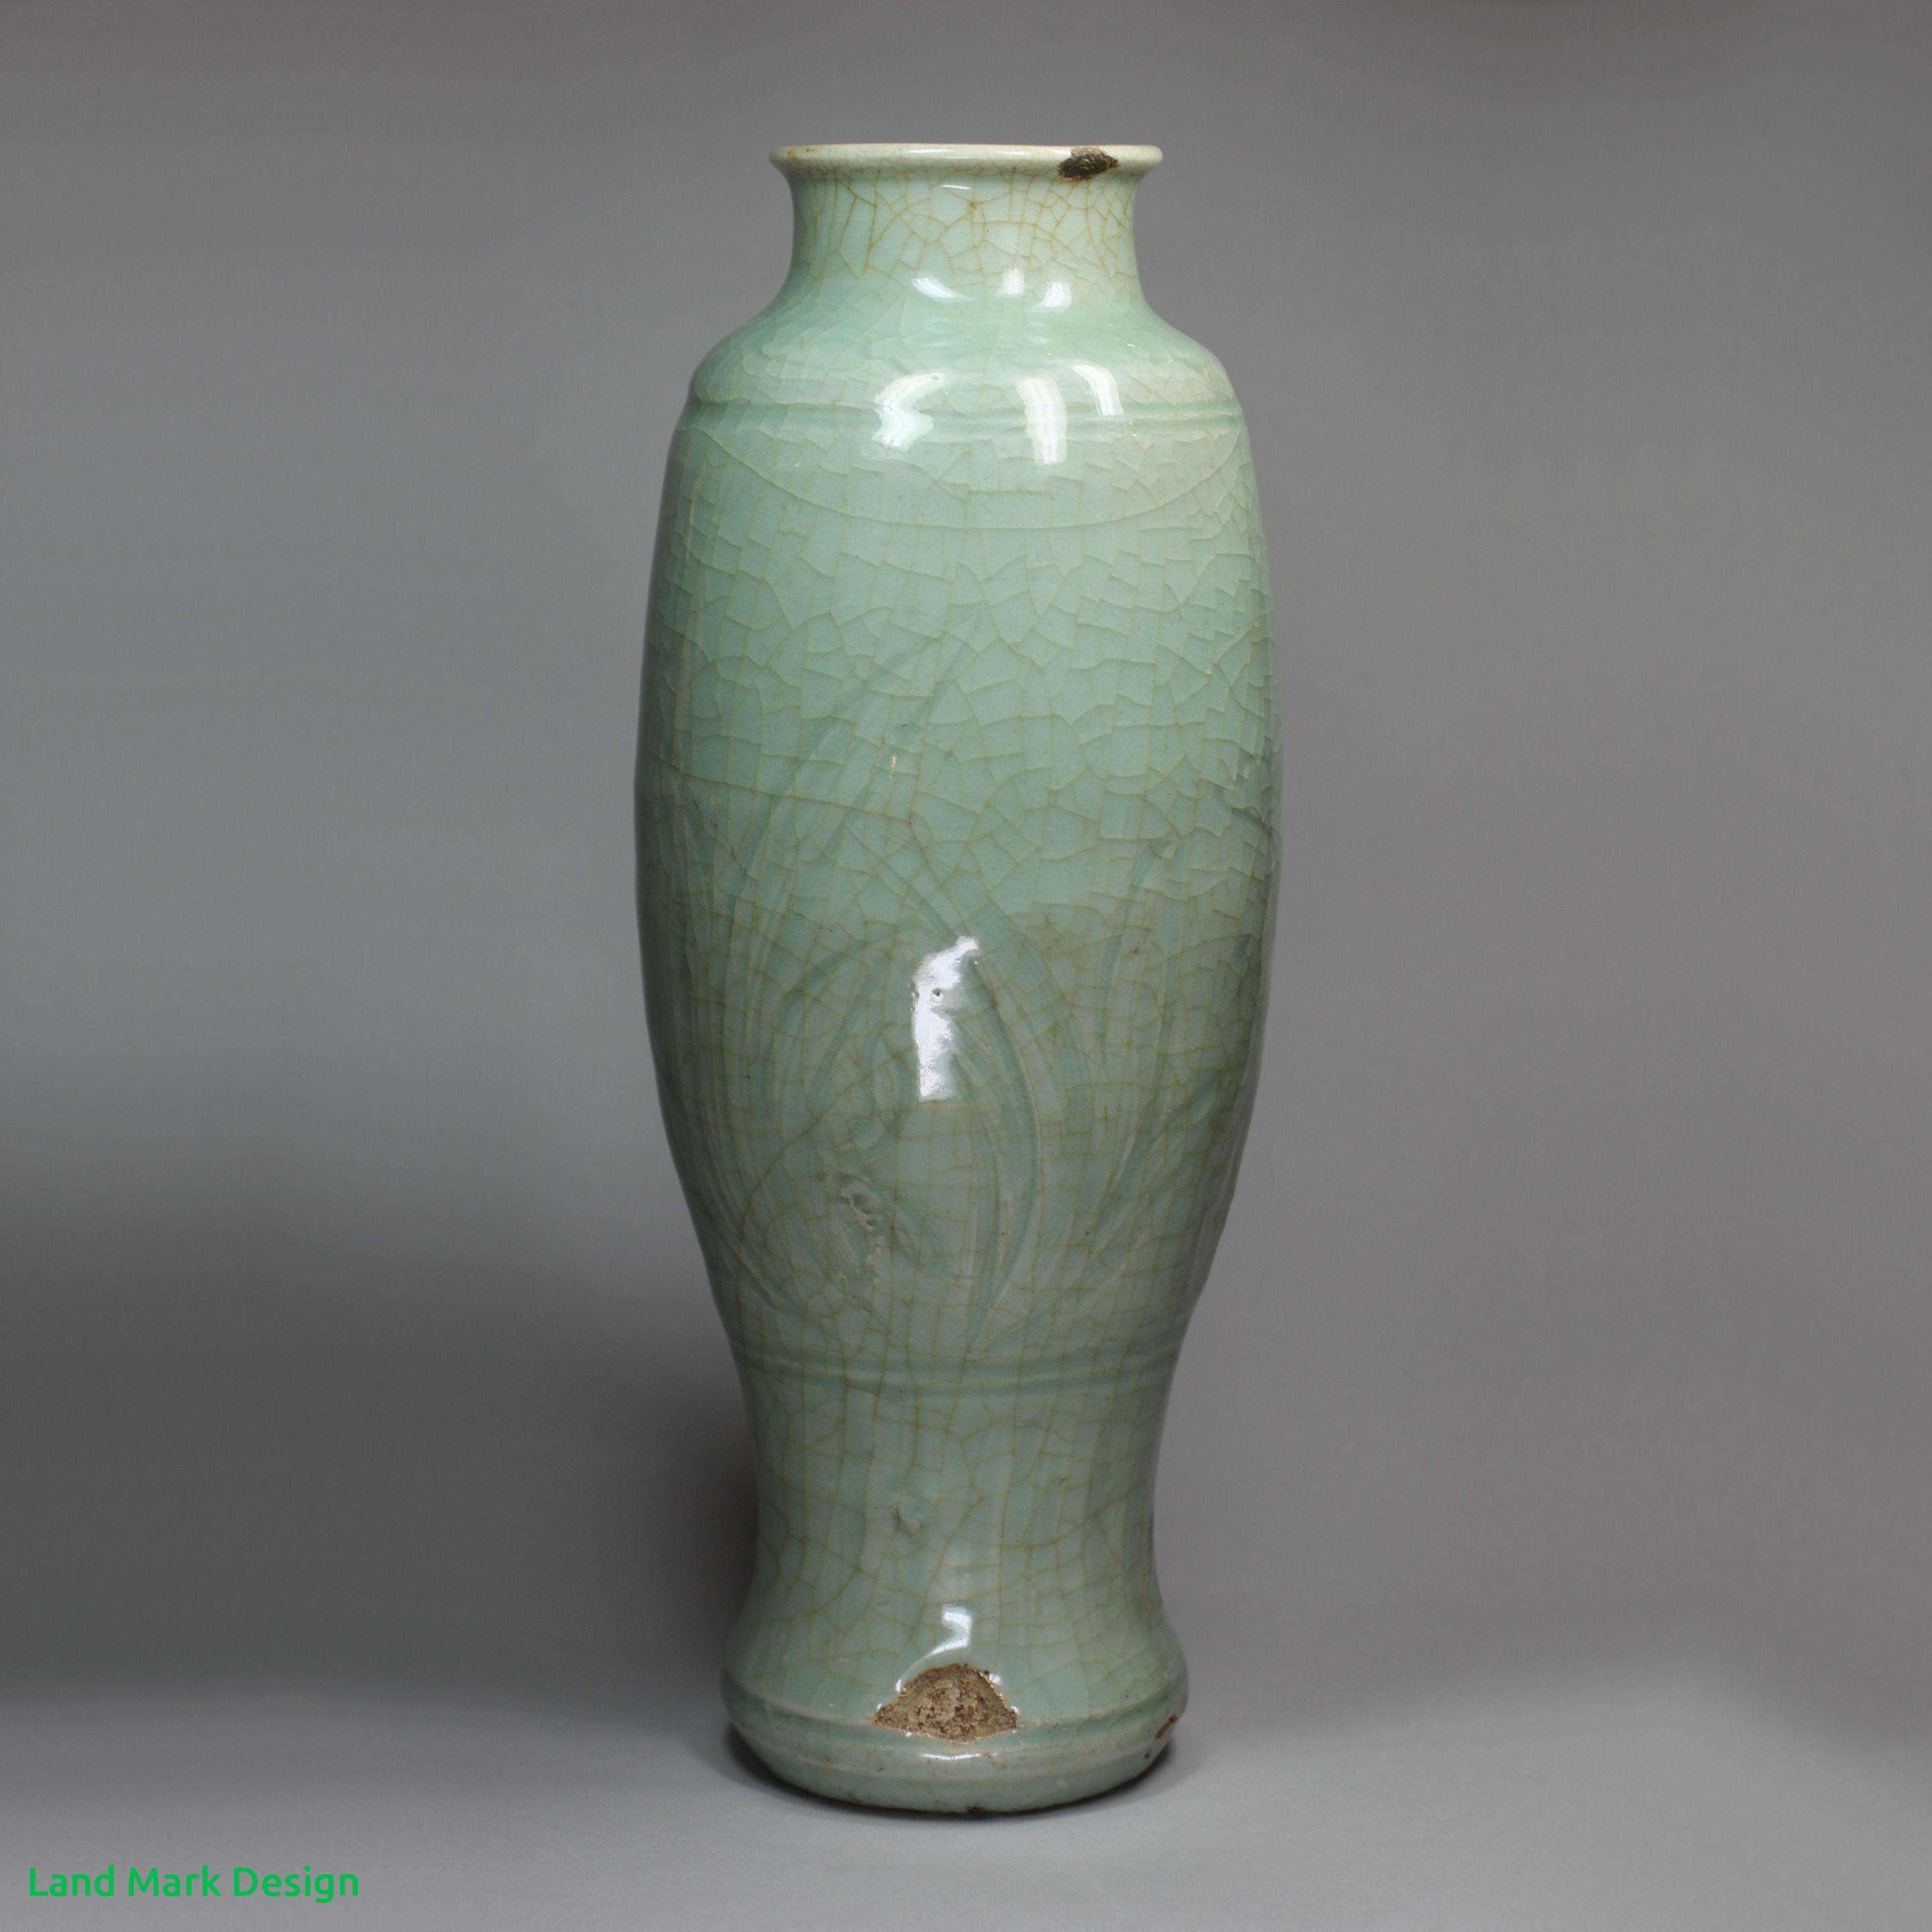 16 Stunning Tall Vases for Sale Cheap 2024 free download tall vases for sale cheap of 22 large chinese vases for the floor the weekly world with regard to cheap floor vase